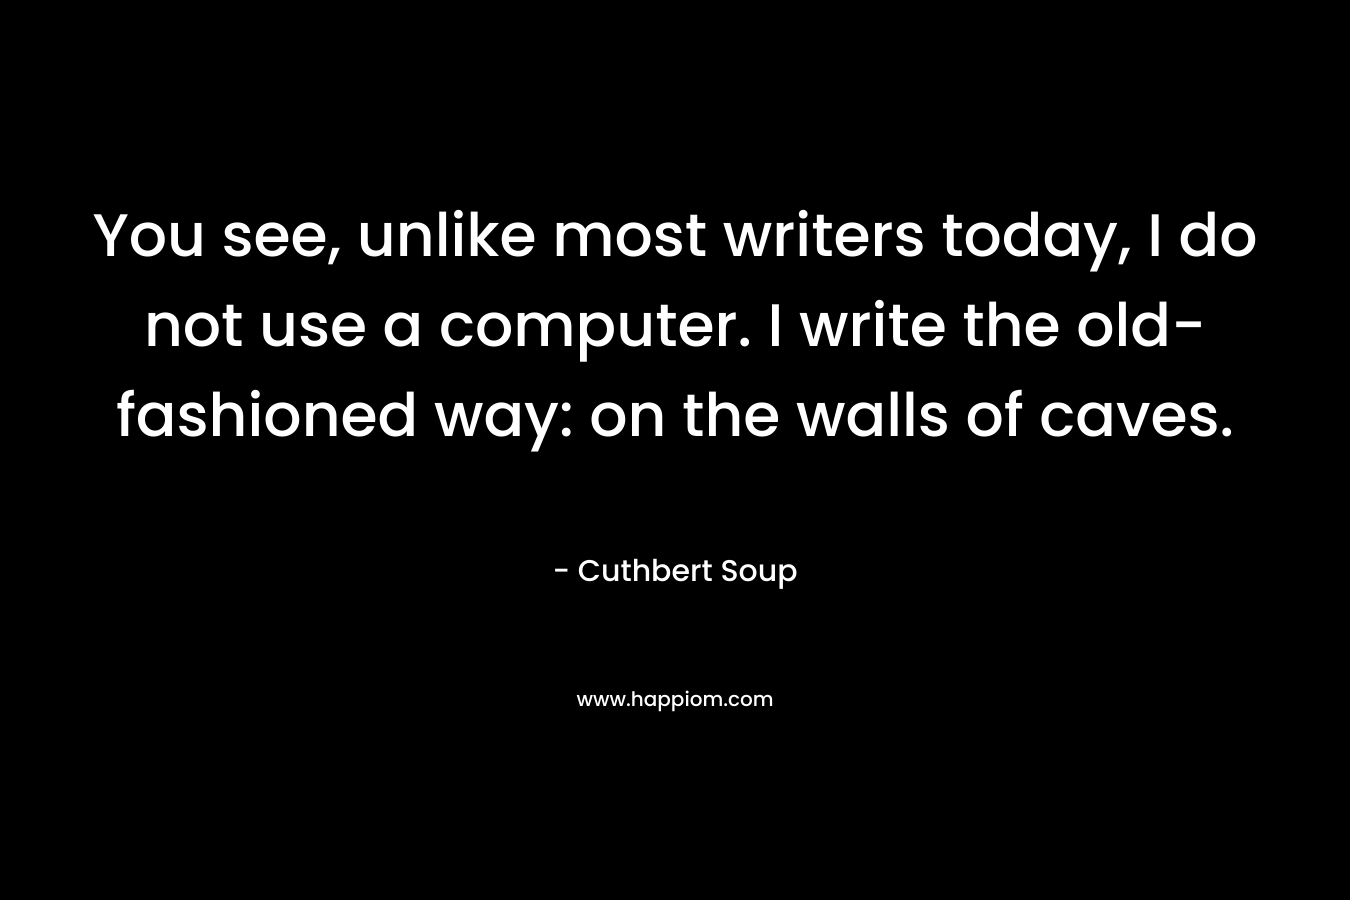 You see, unlike most writers today, I do not use a computer. I write the old-fashioned way: on the walls of caves. – Cuthbert Soup